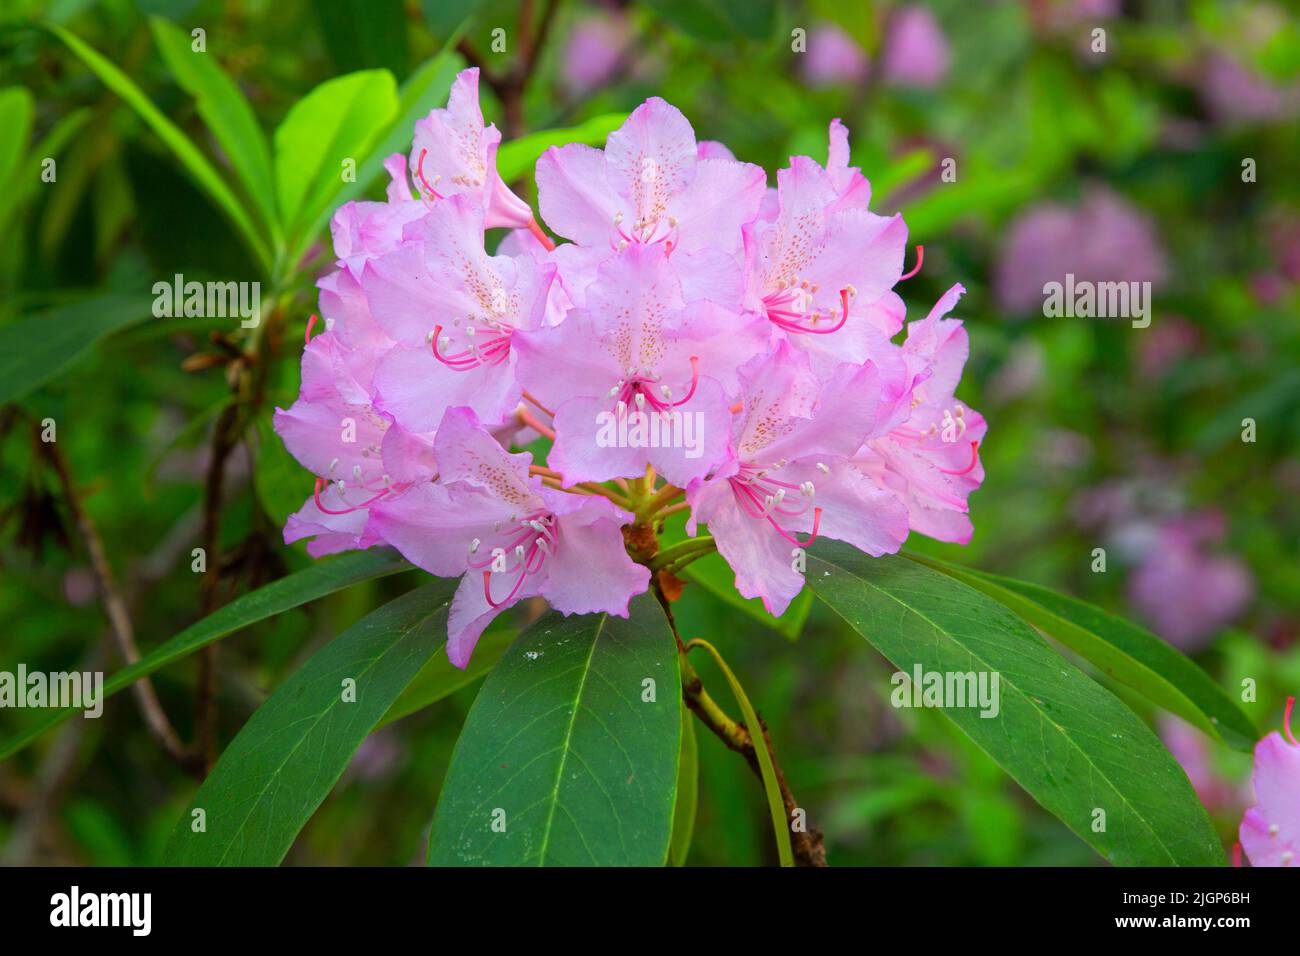 Pacific rhododendron (Rhododendron macrophyllum) in bloom, Willamette National Forest, Aufderheide National Scenic Byway, Oregon Stock Photo